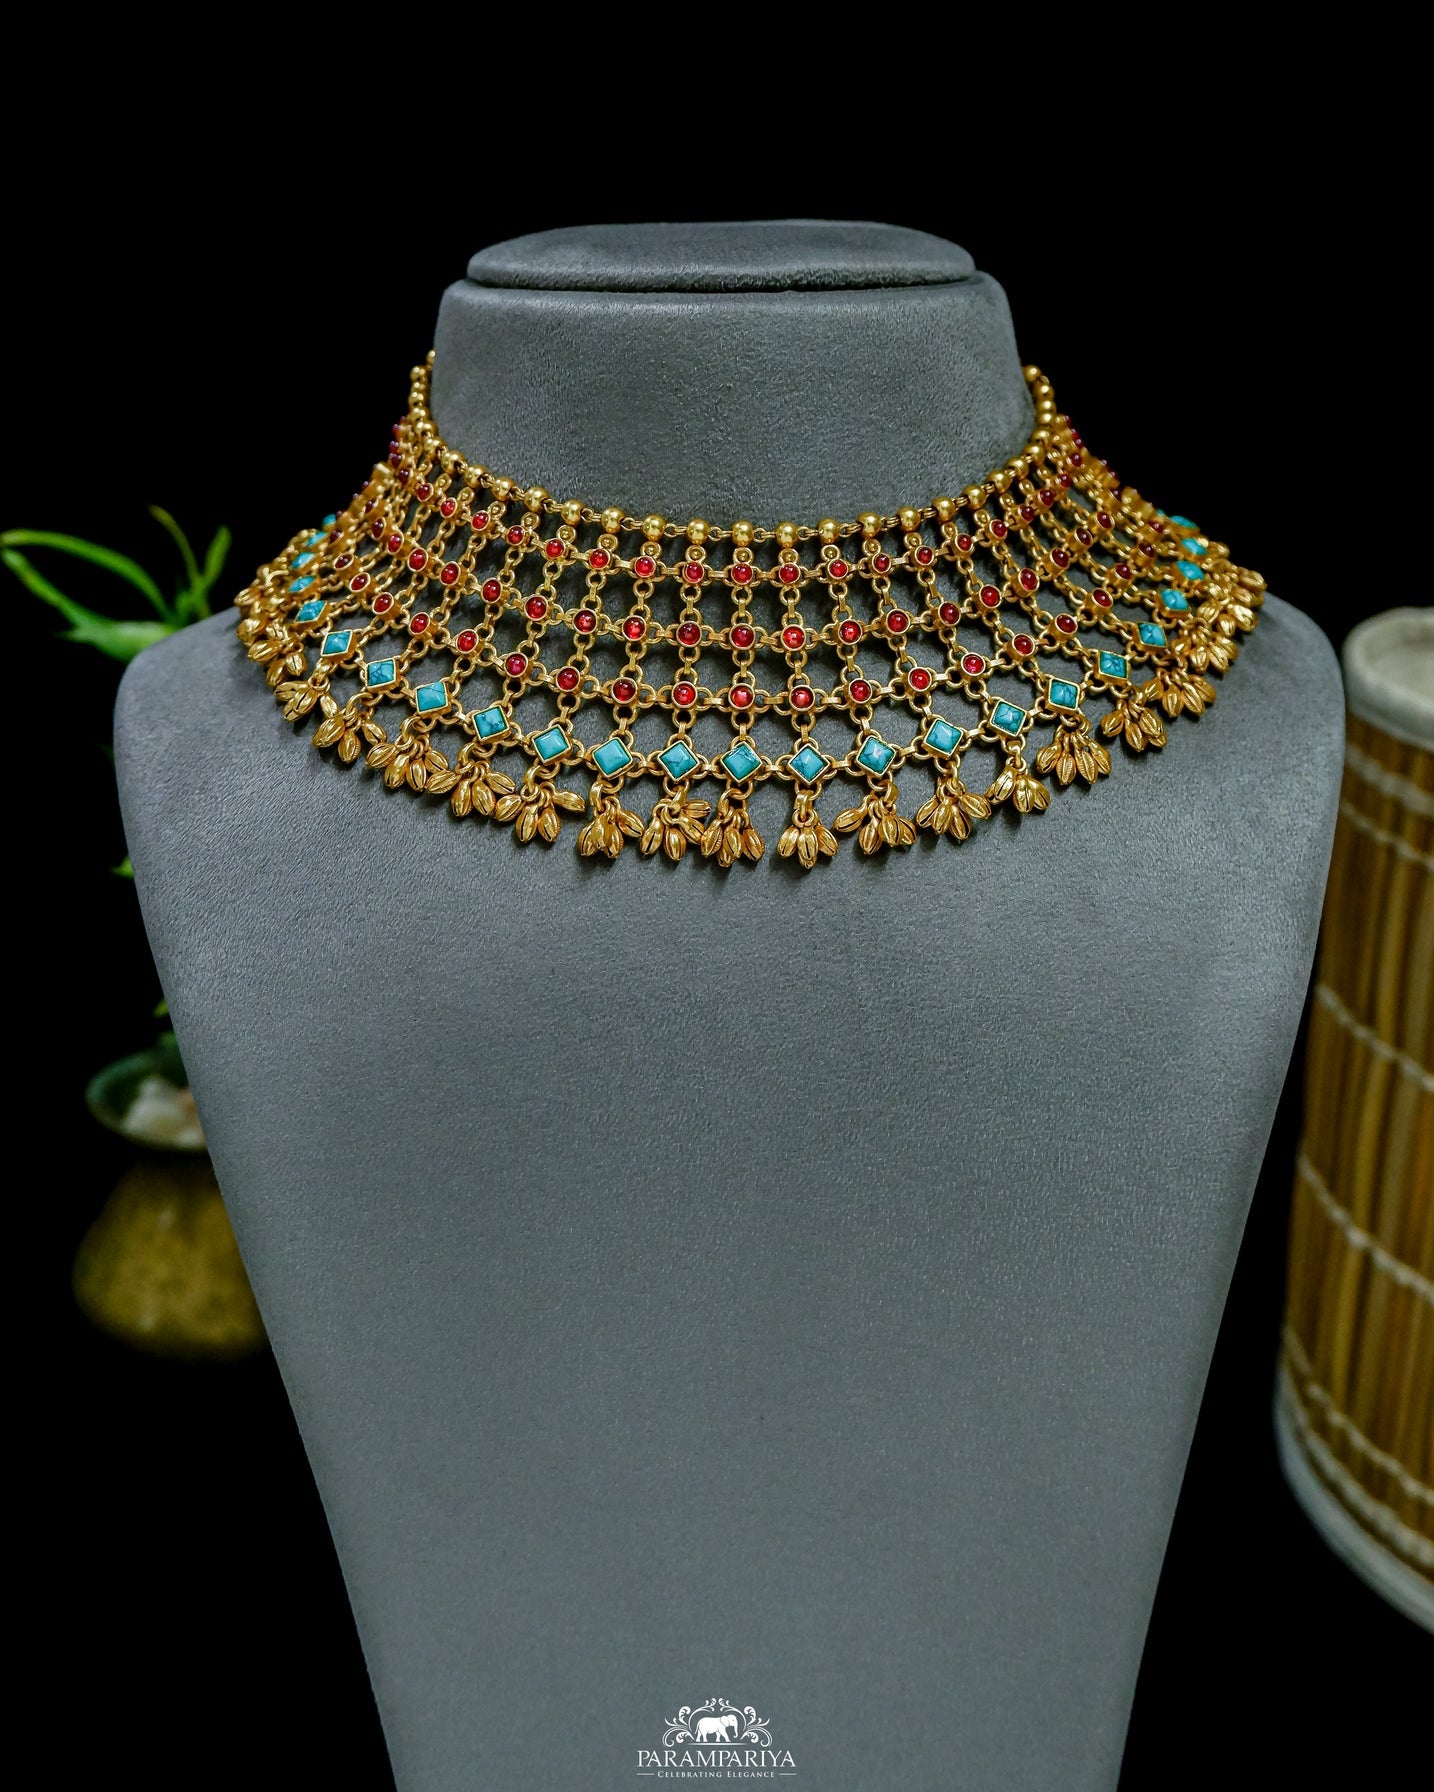 Pure silver micron gold plated necklace with carefully crafted intricate link patterns with semi precious green or pink kemp stones with a touch of turquoise or coral charm.